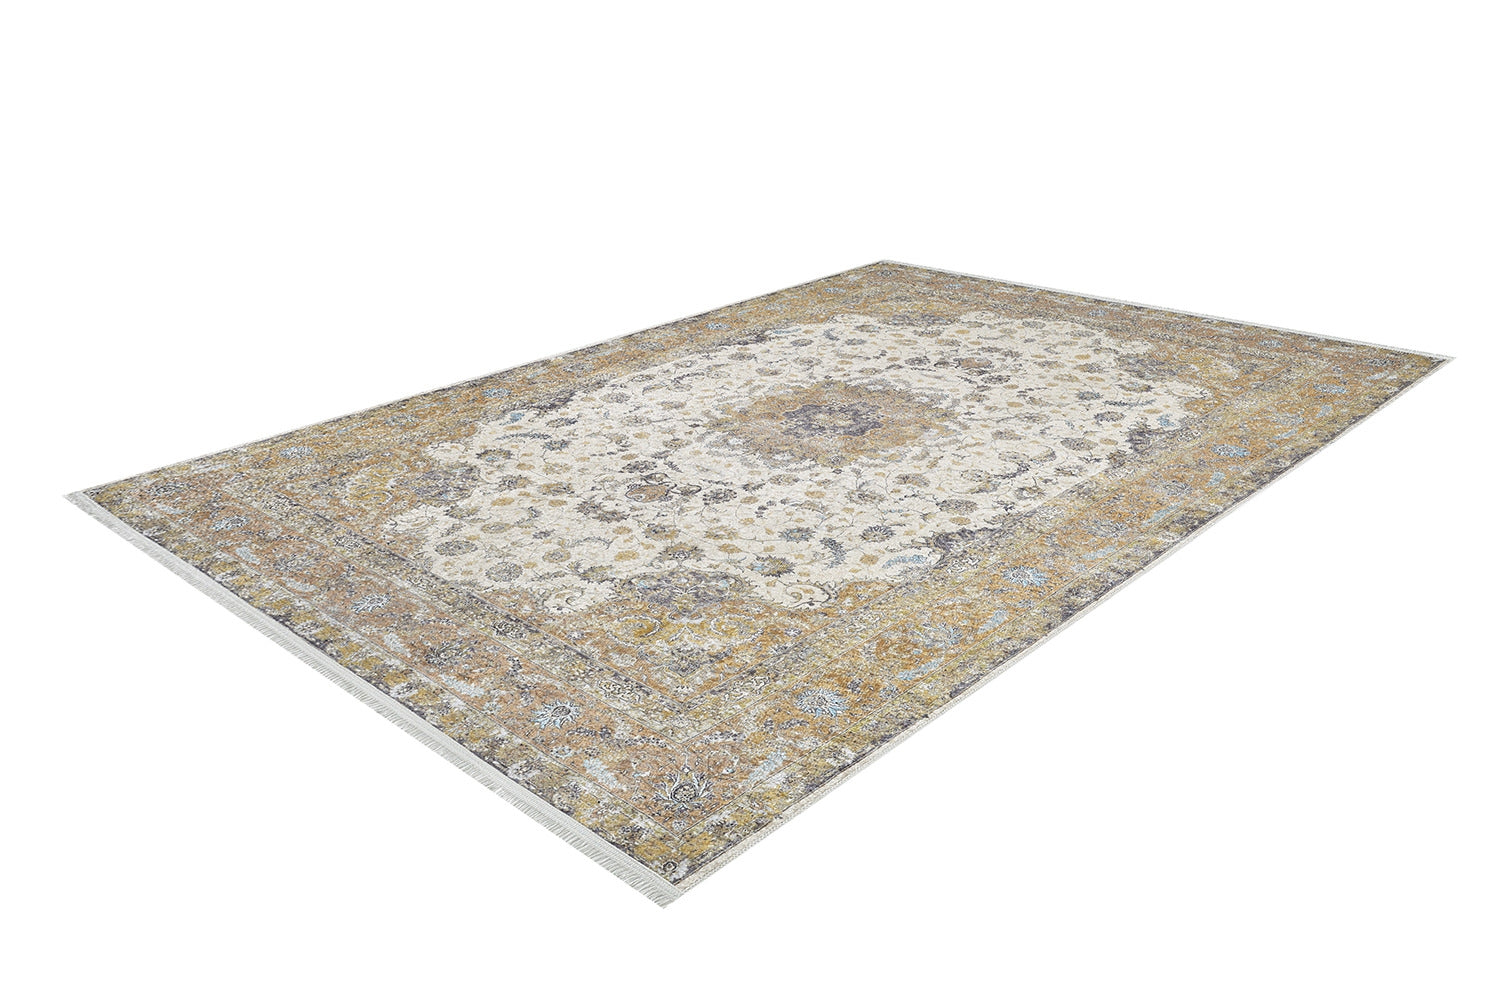 machine-washable-area-rug-Medallion-Persian-Collection-Yellow-Gold-Cream-Beige-JR1930